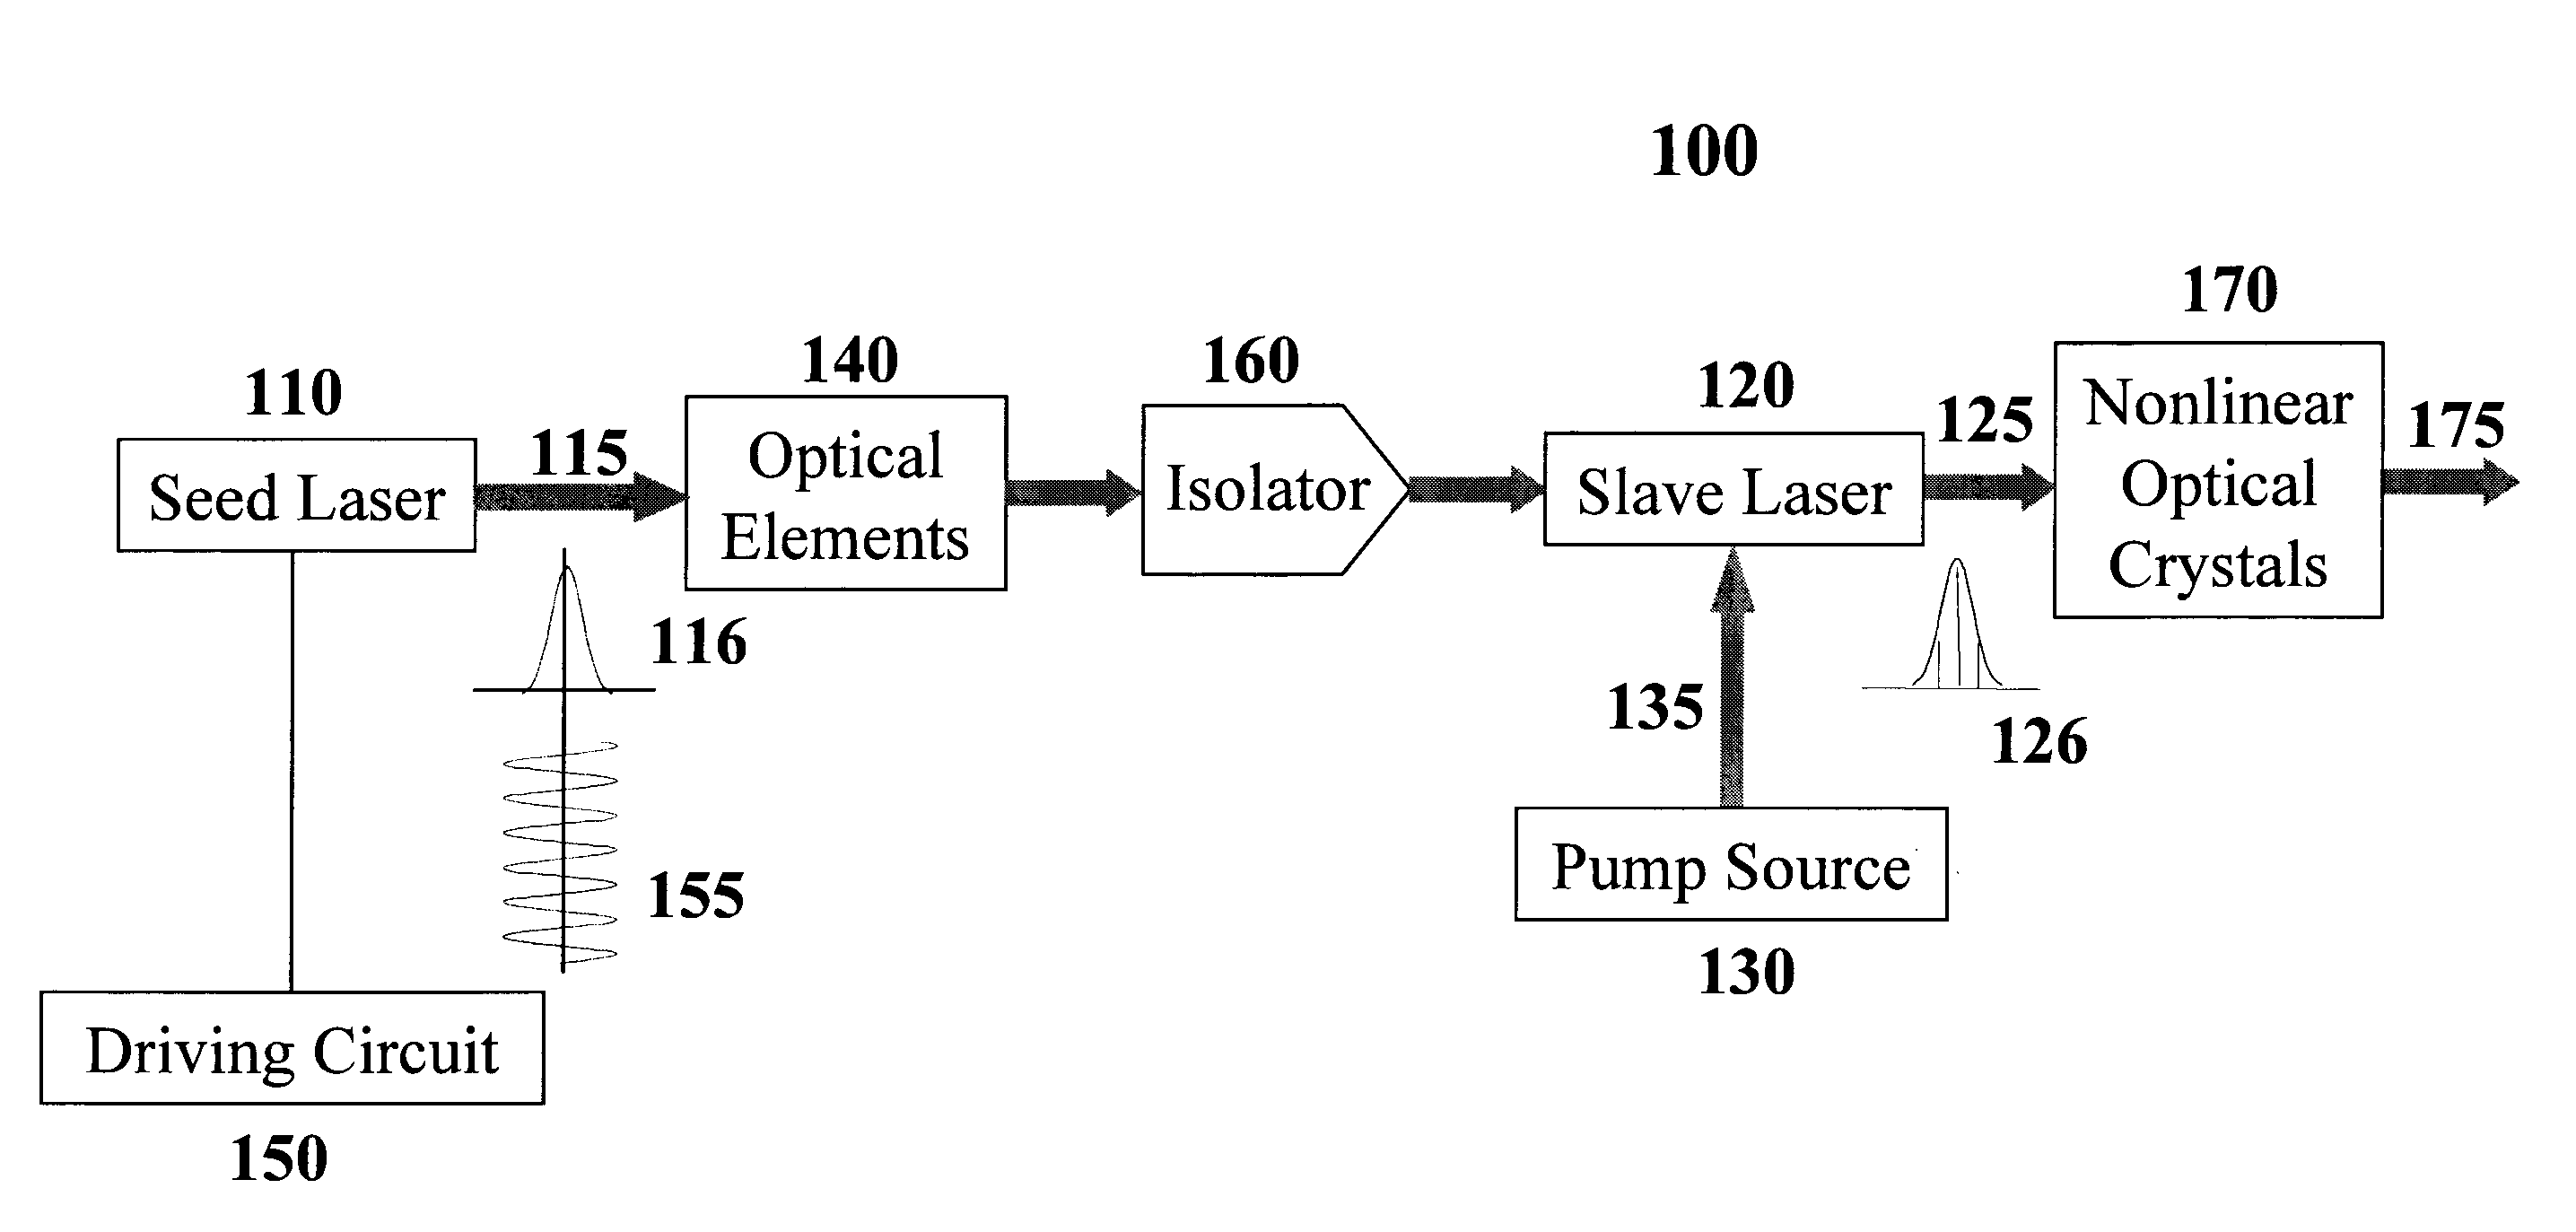 Method and apparatus for producing UV laser from all-solid-state system